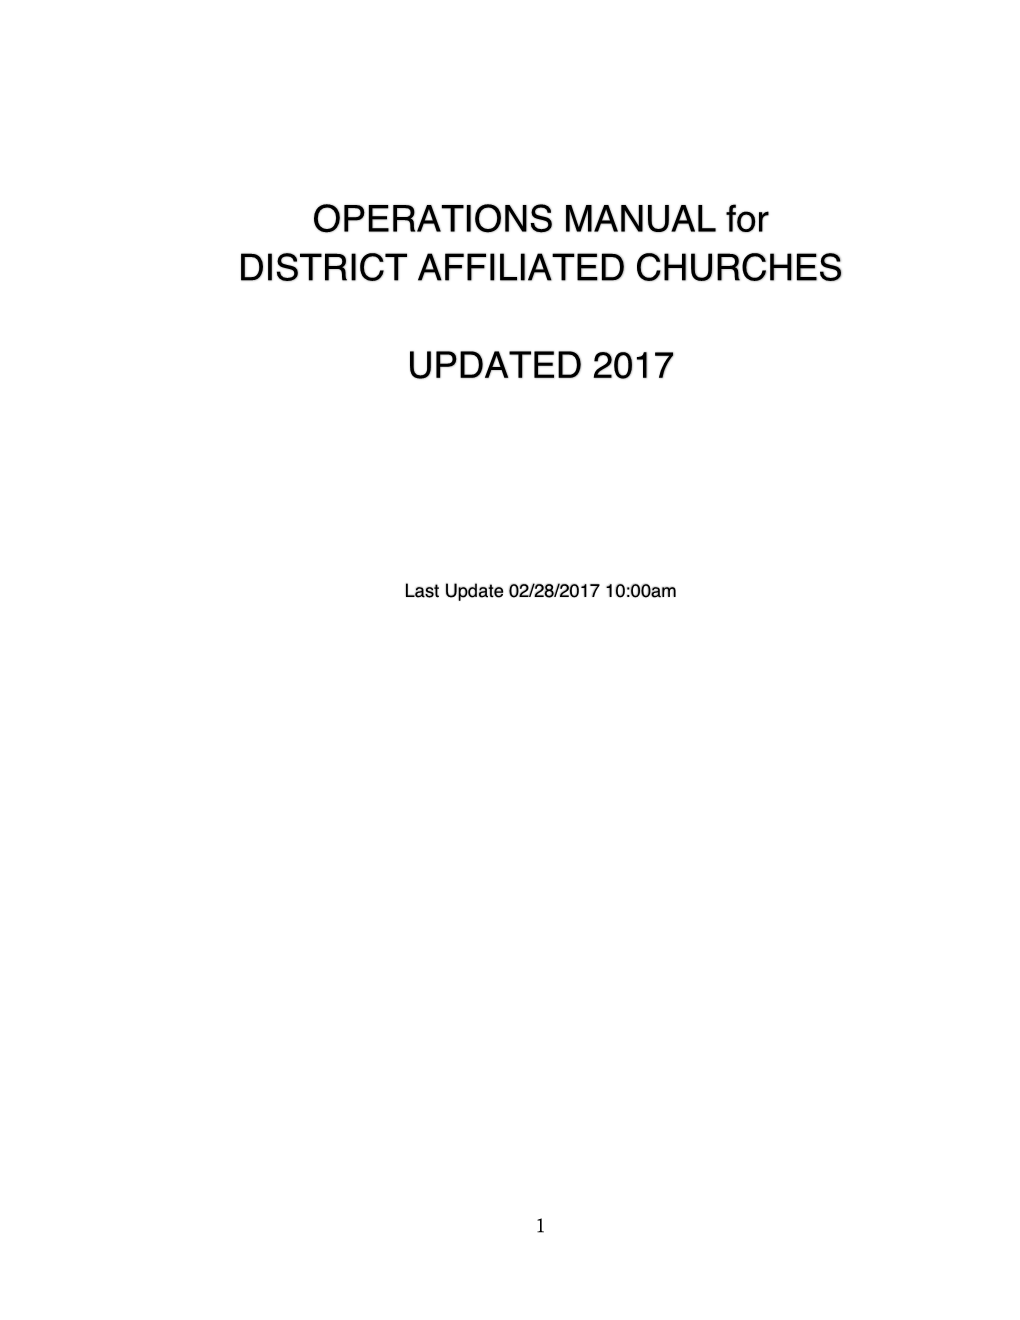 Operation's Manual for District Affiliated Churches